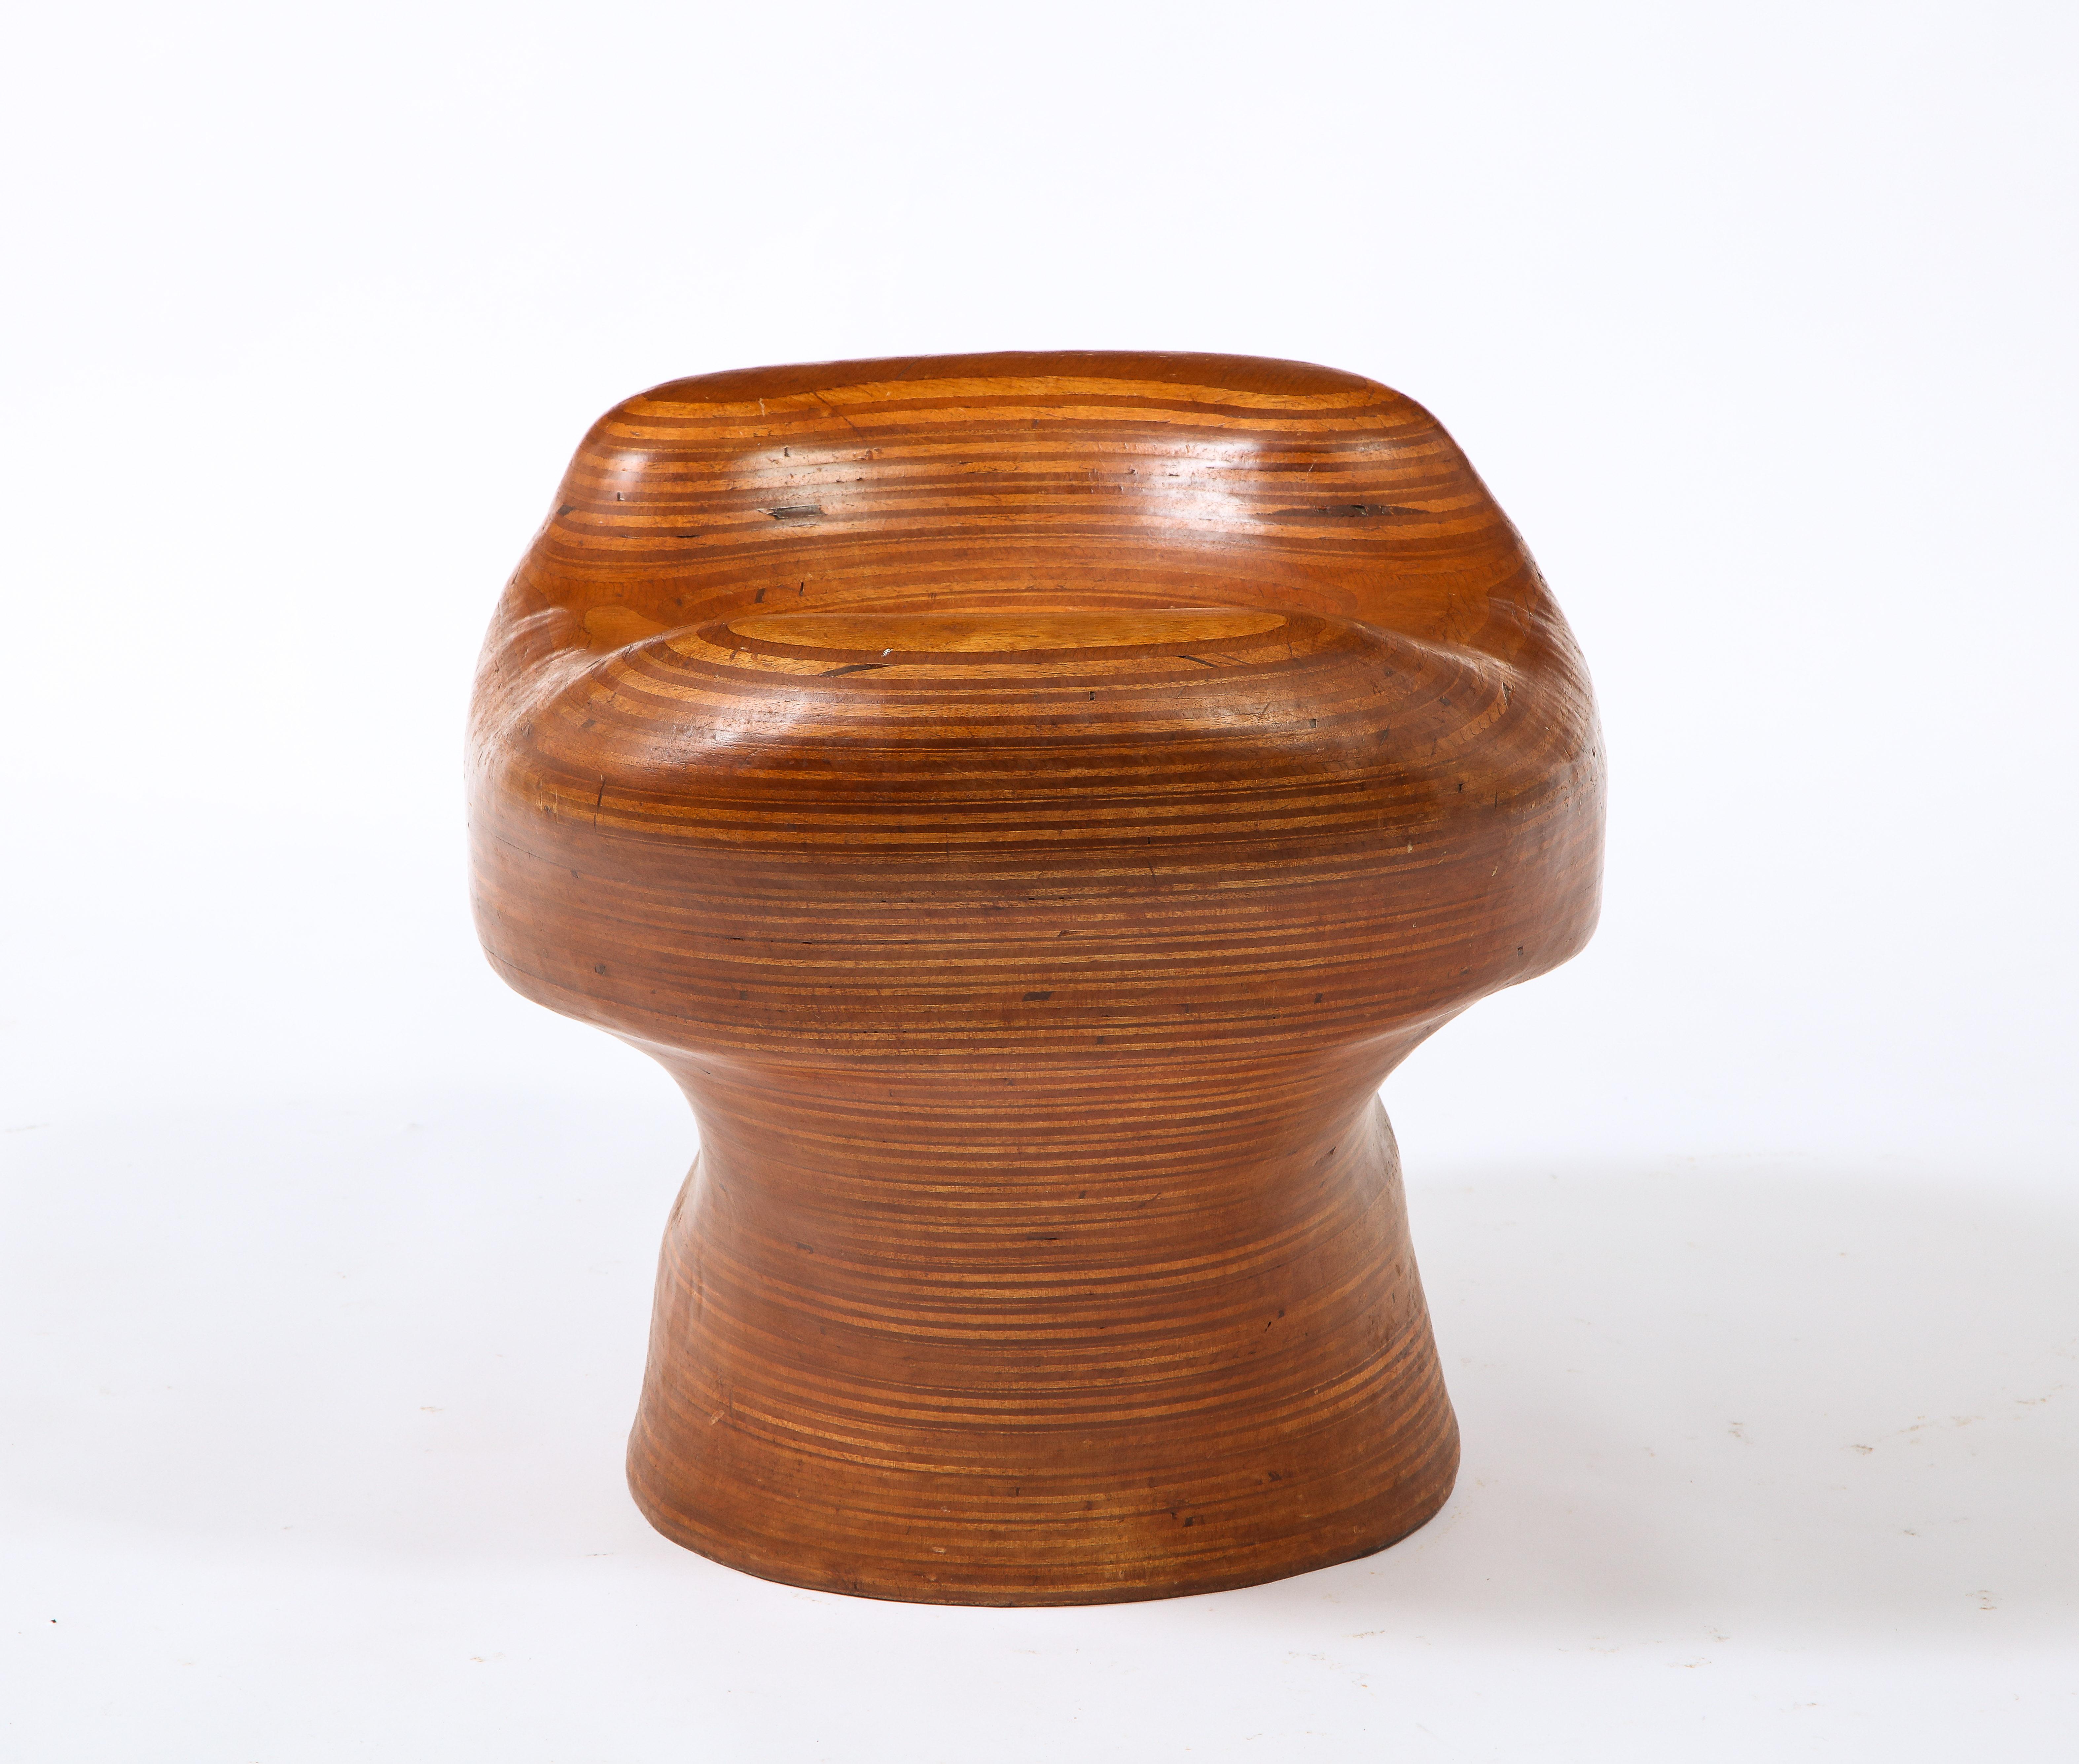 Denis Cospen Biomorphic Stool in Laminated Wood, France 1960's For Sale 2